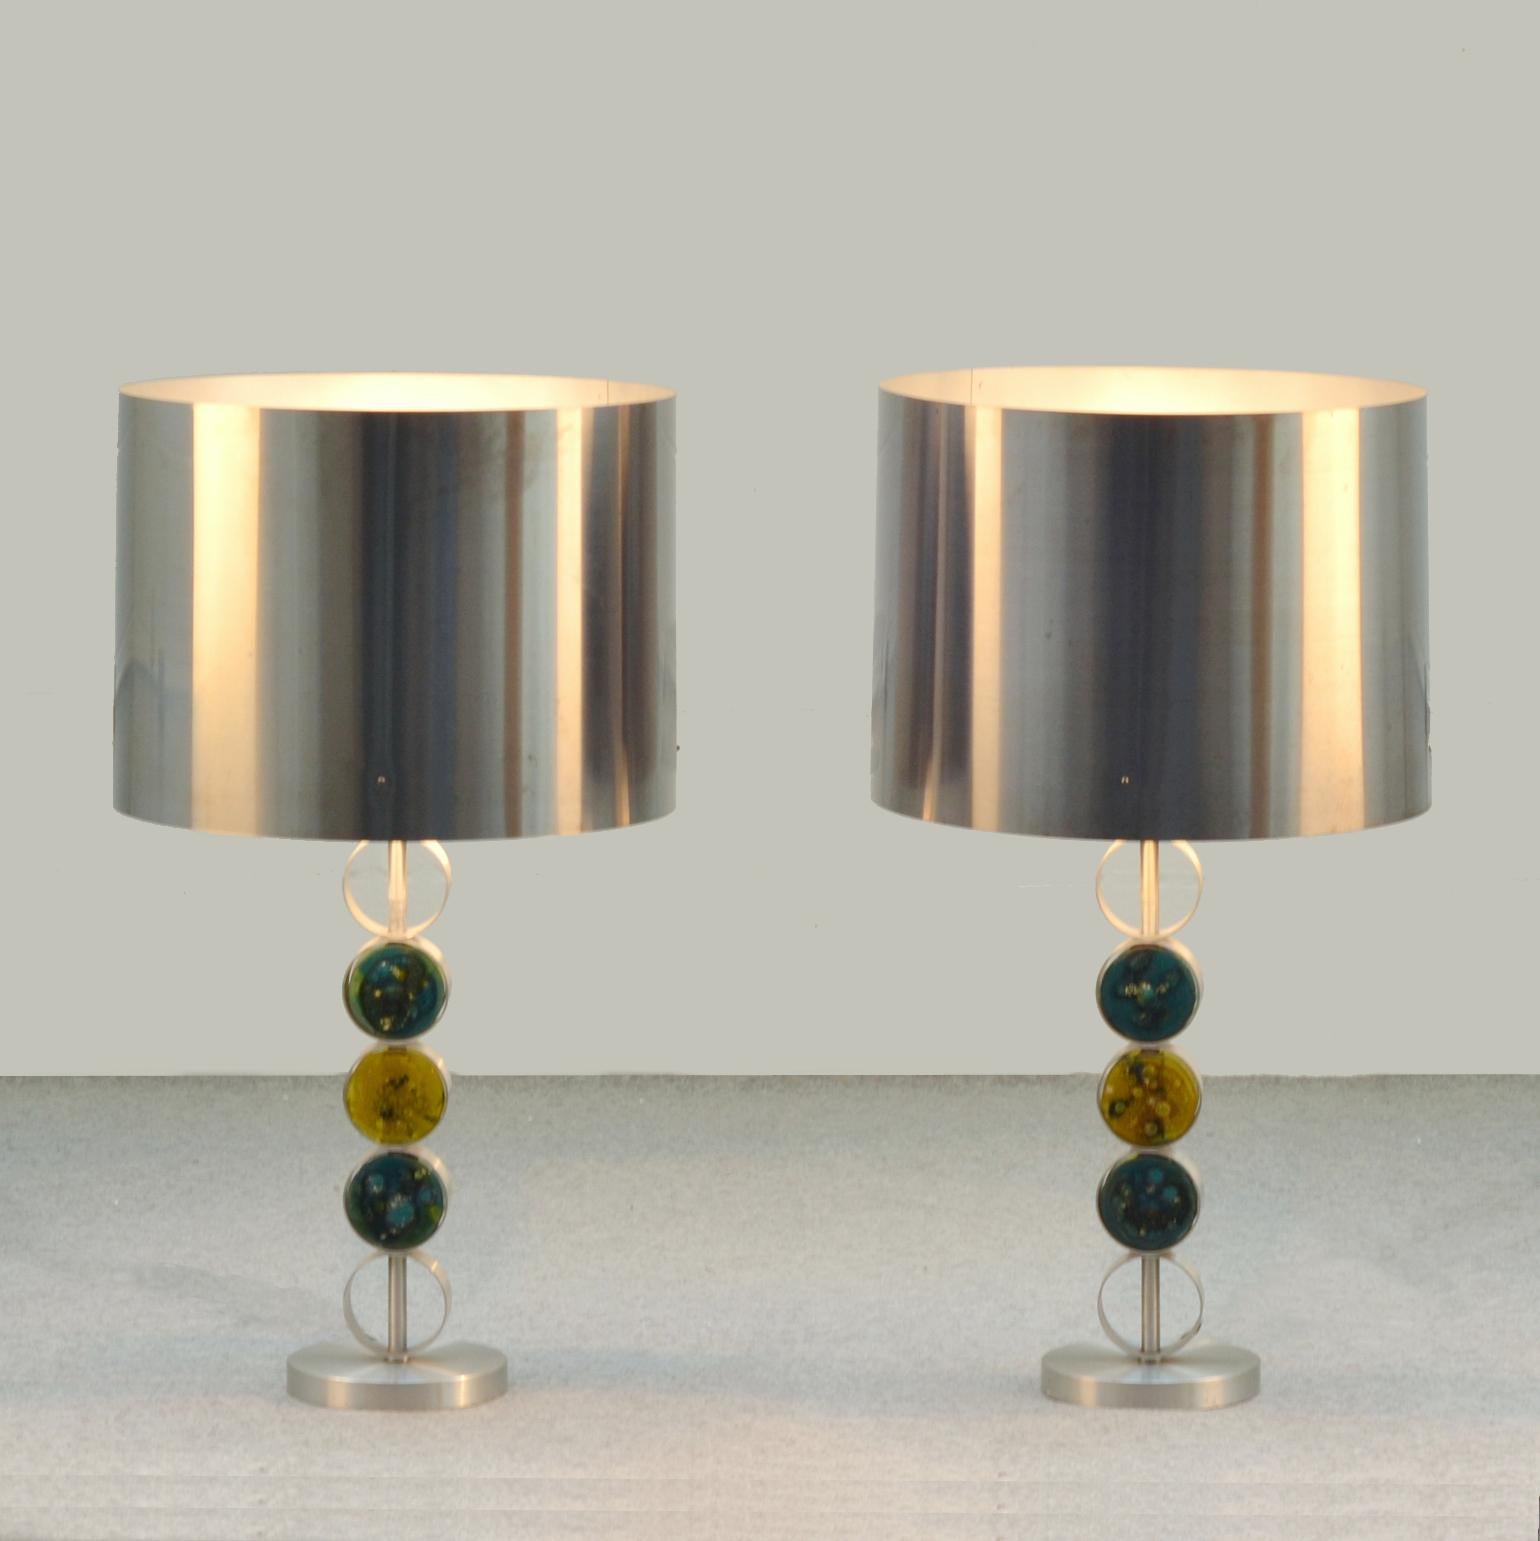 Mid-Century Modern Pair of Large Table Lamps by RAAK 1970's Attributed to Nanny Still For Sale